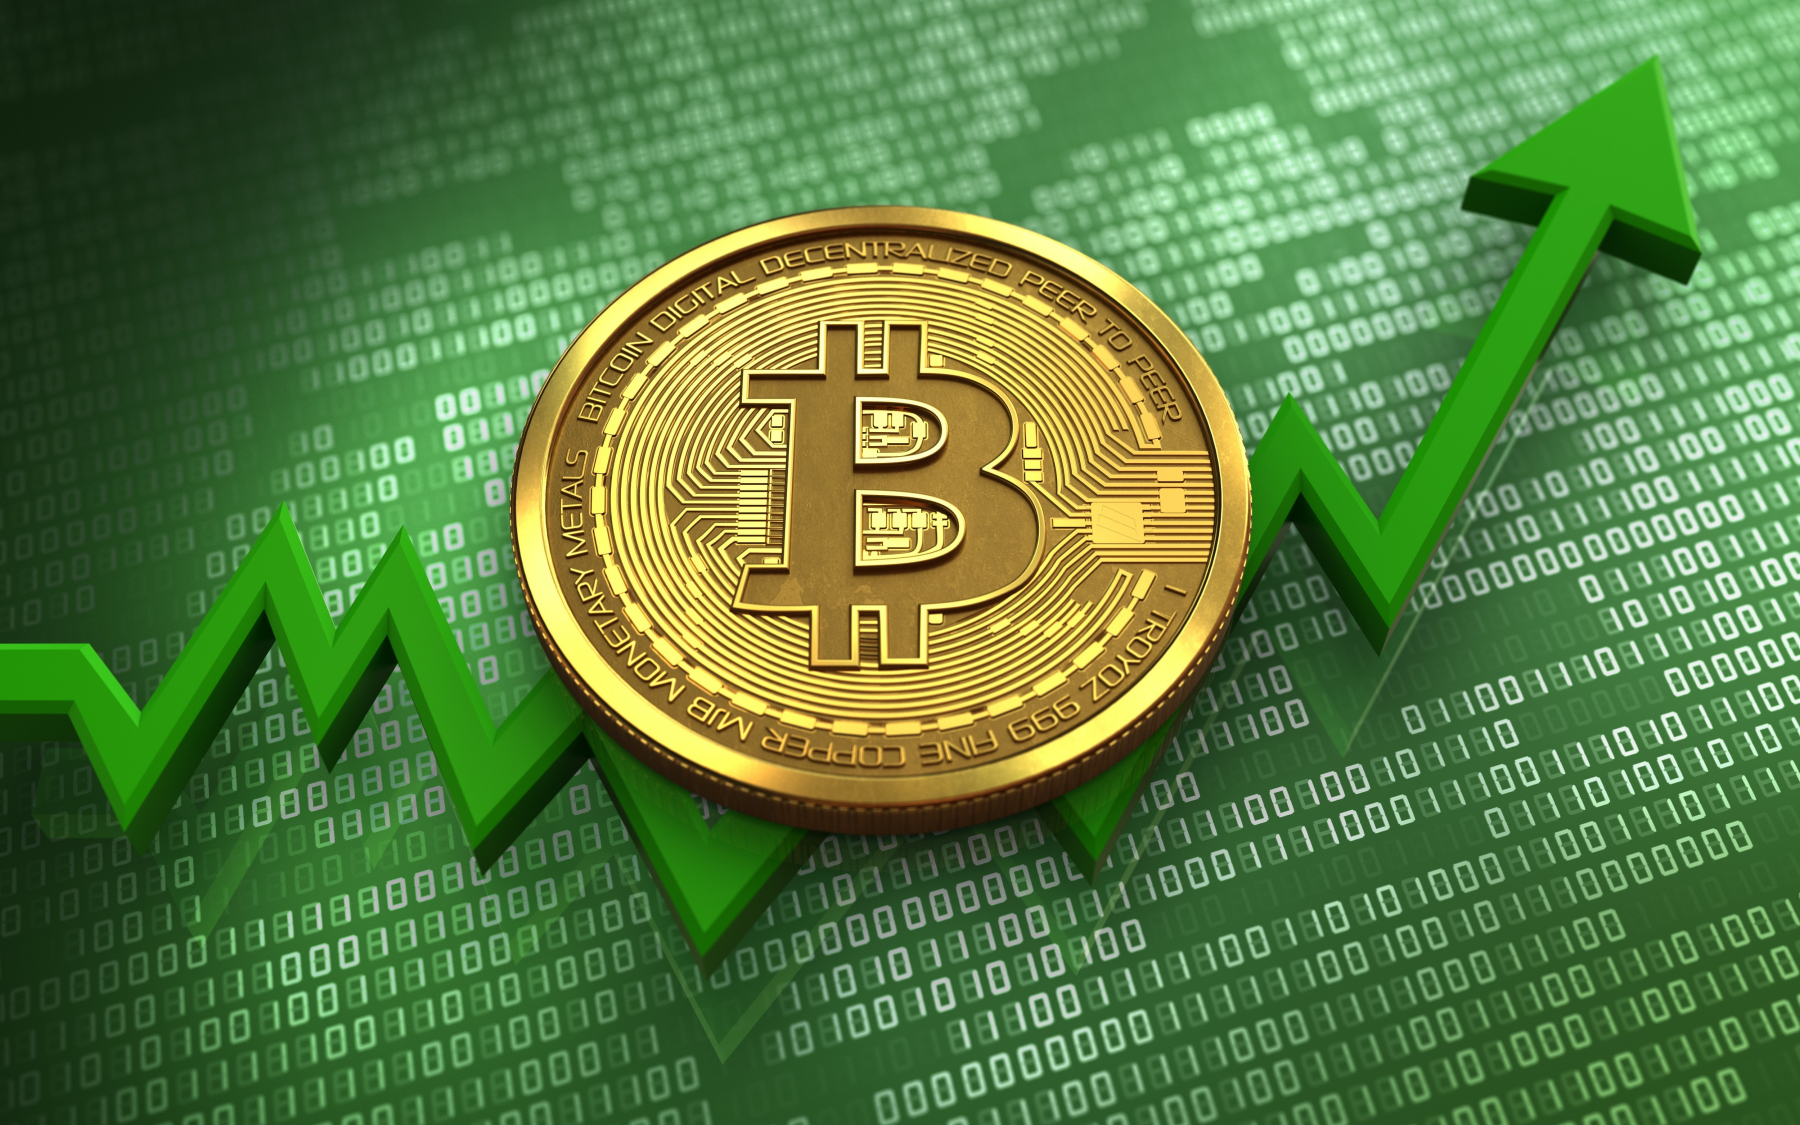 Cathie Wood: Bitcoin is going to hit $1 million price
